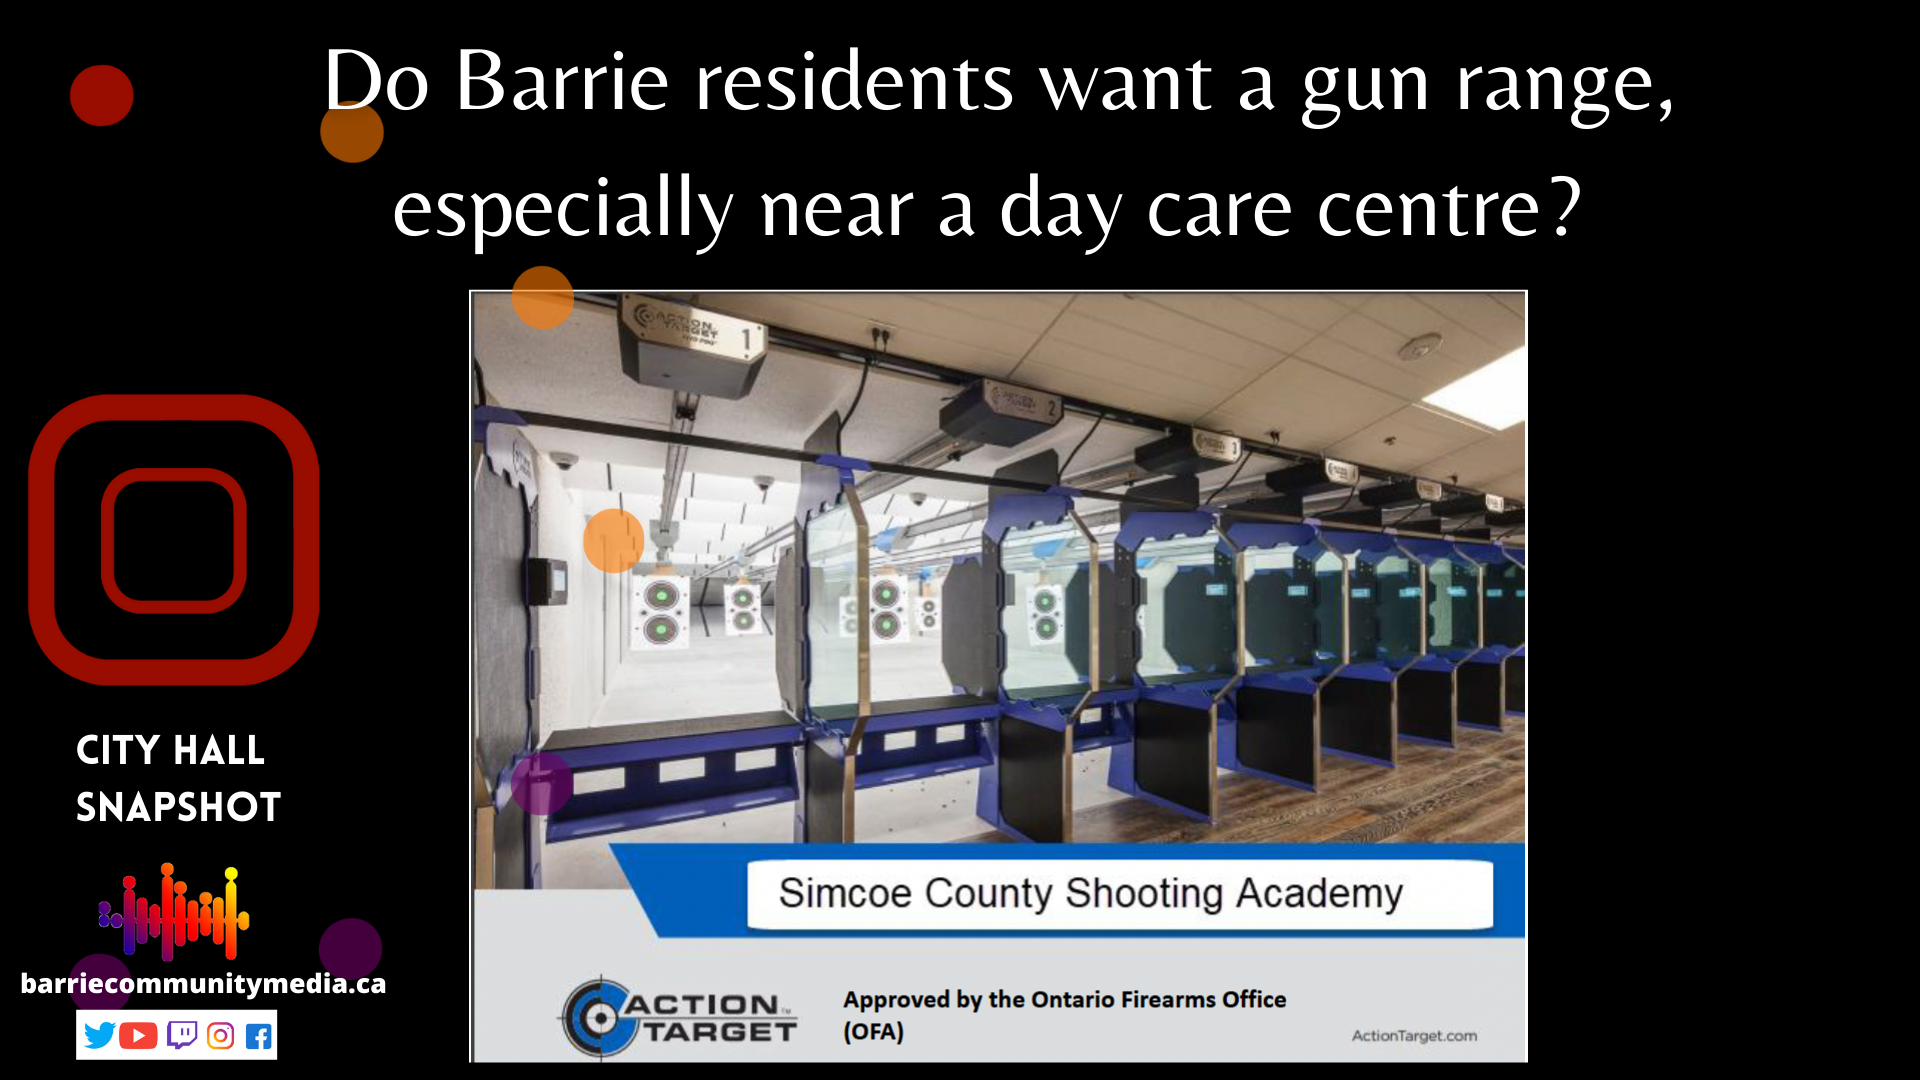 Do Barrie residents want a gun range in the city, especially near a day care centre?